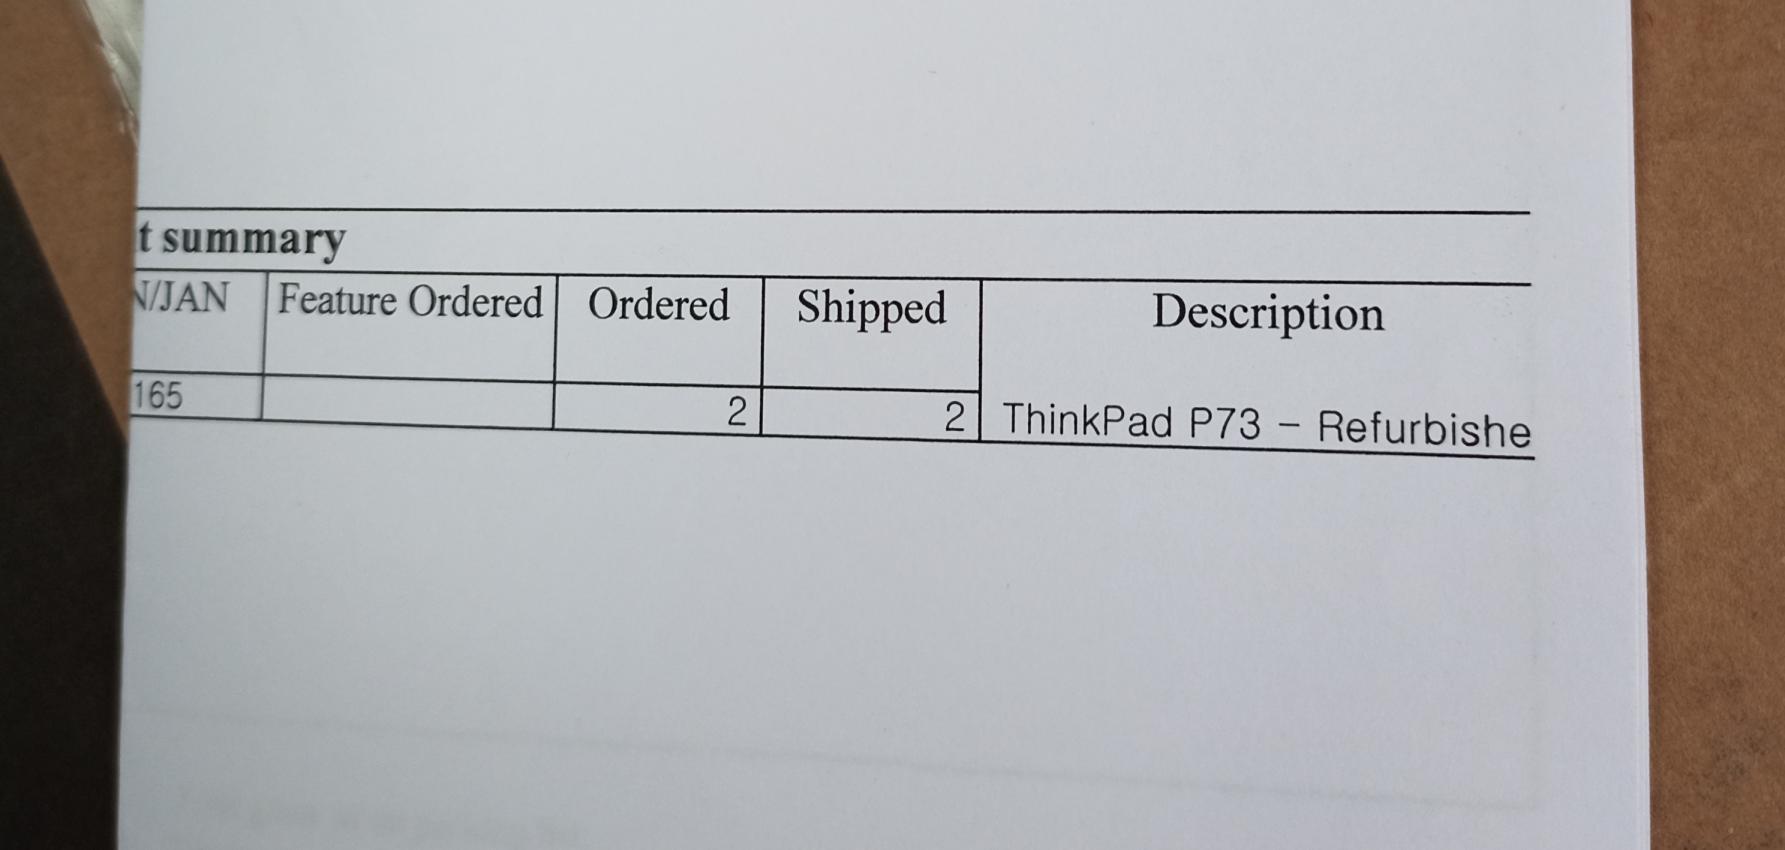 The packaging list, my order is for ThinkPad P73